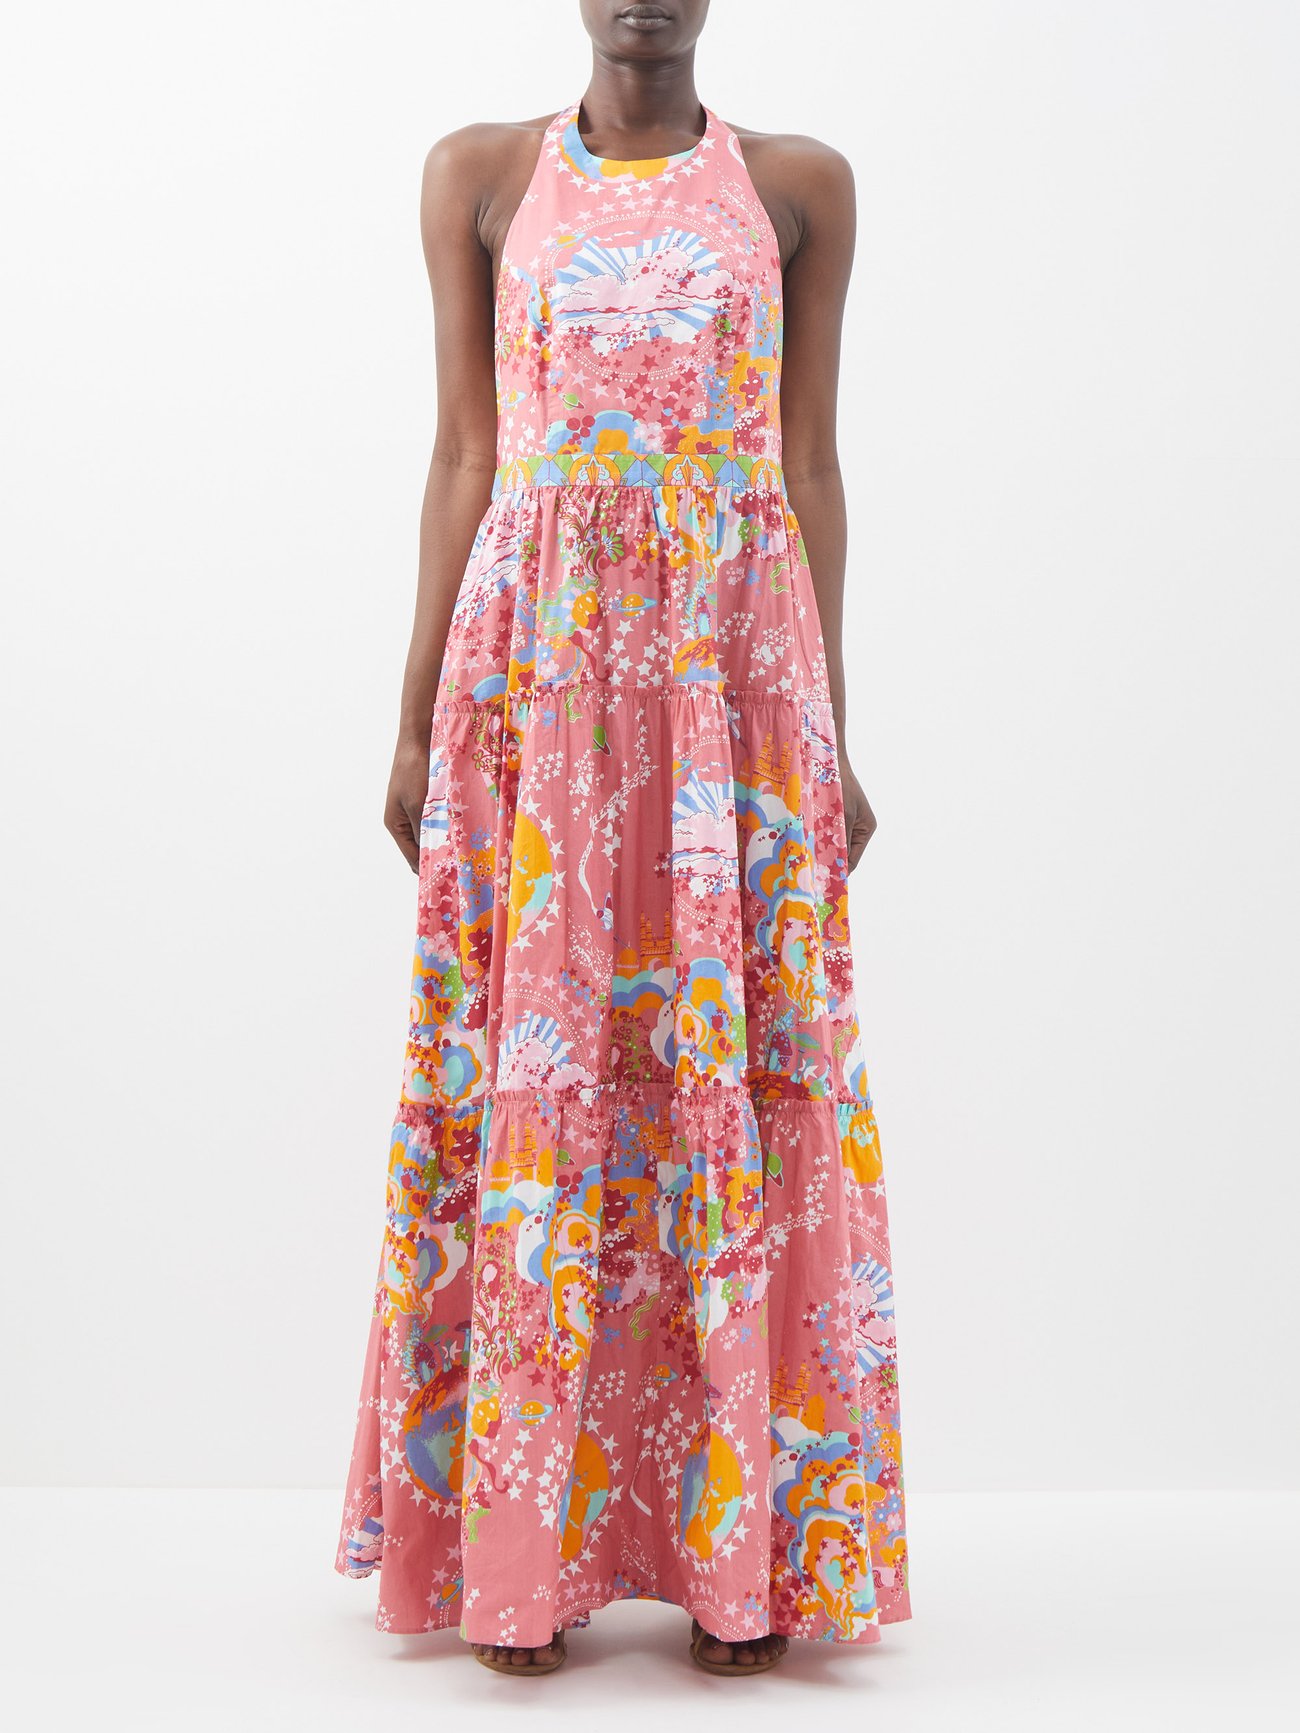 Emporio Sirenuse's pink Isotta dress is crafted from lightweight cotton voile that is hand-printed with the label's whimsical Caliph's dream pattern. It is maxi in length with a full skirt, fitted bodice, and round halter neck that ties at the back and reveals the back.